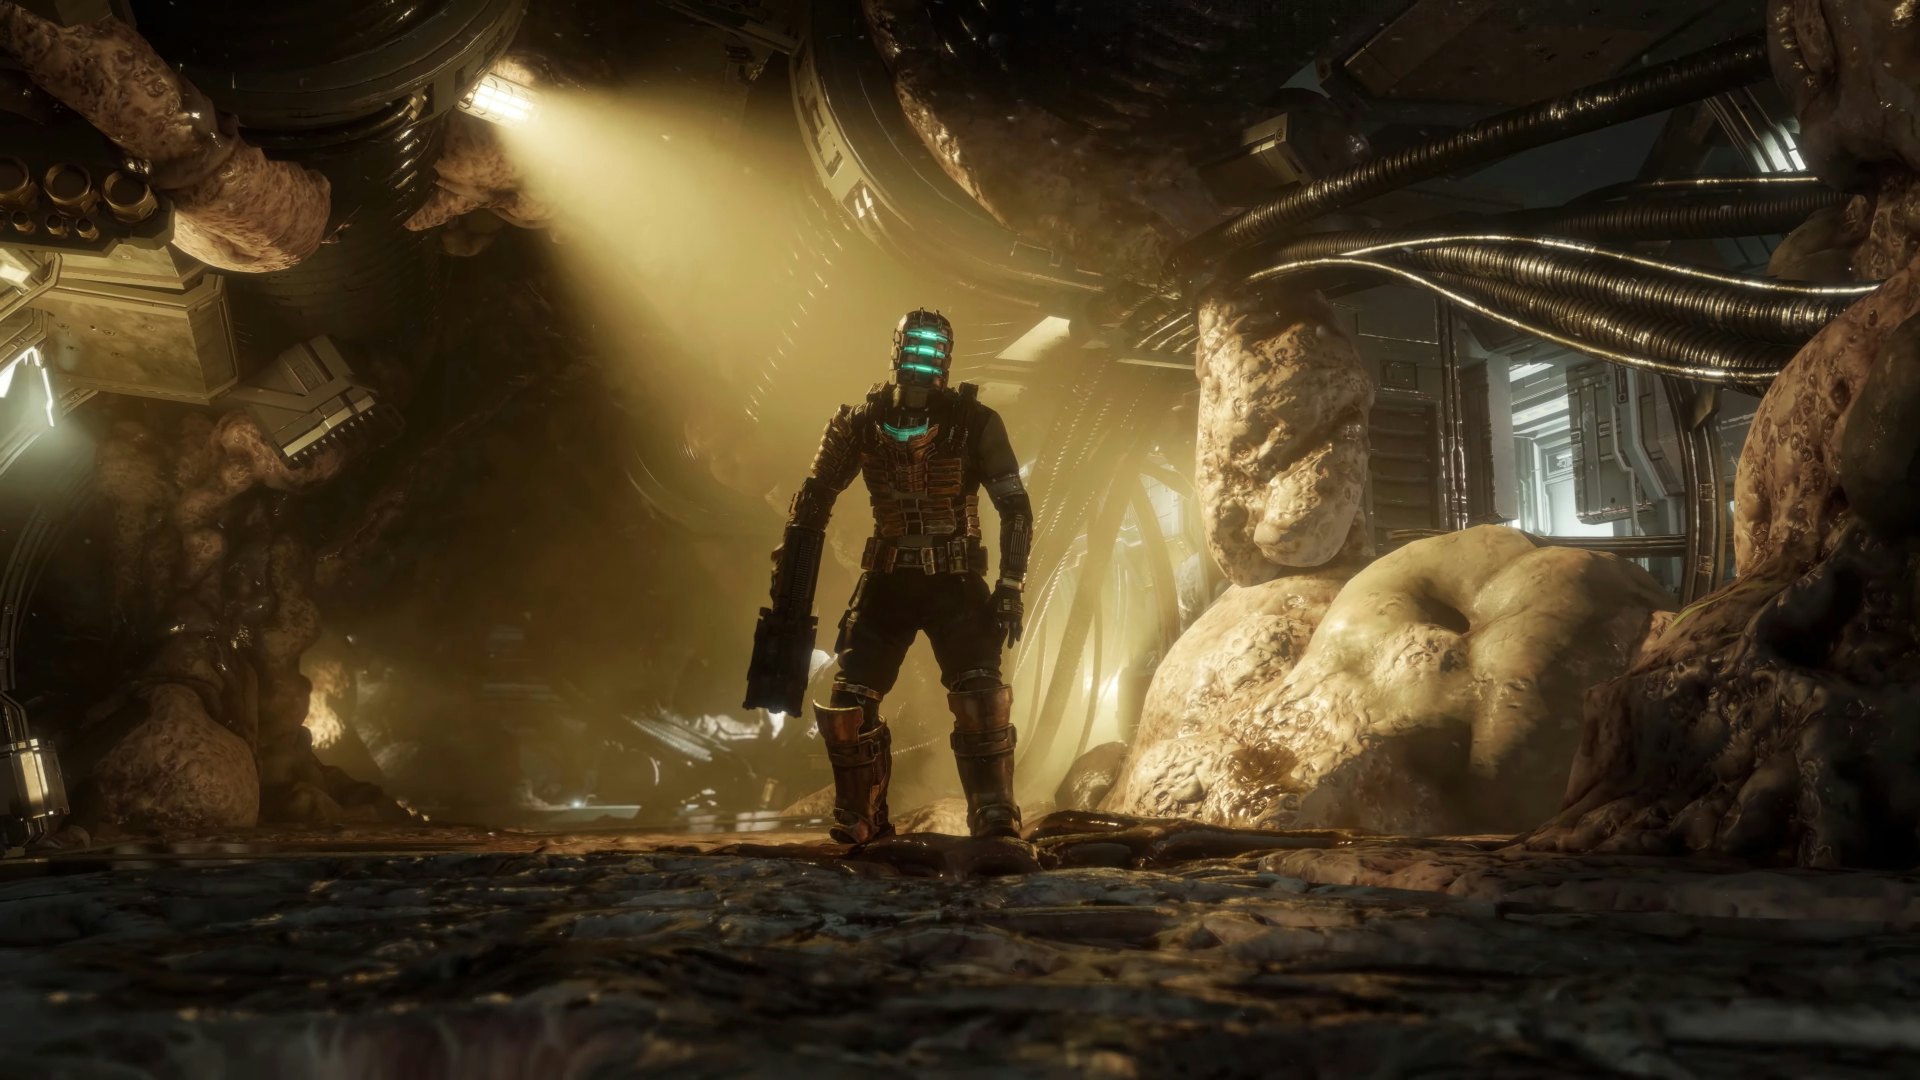 Look! 'Dead Space' gameplay trailer in 7 chilling images